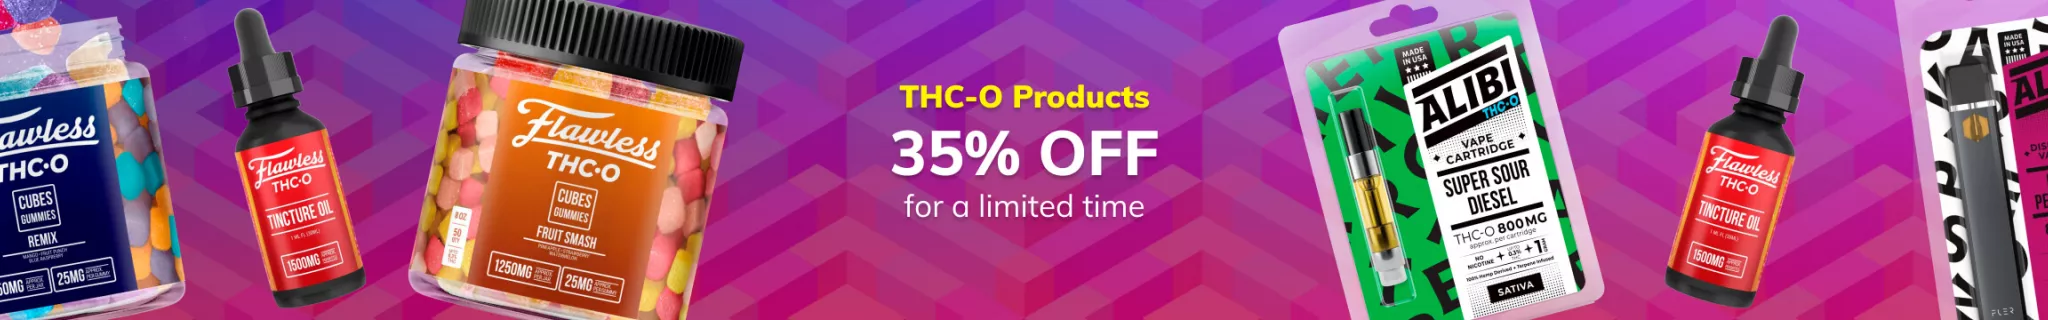 THCO products